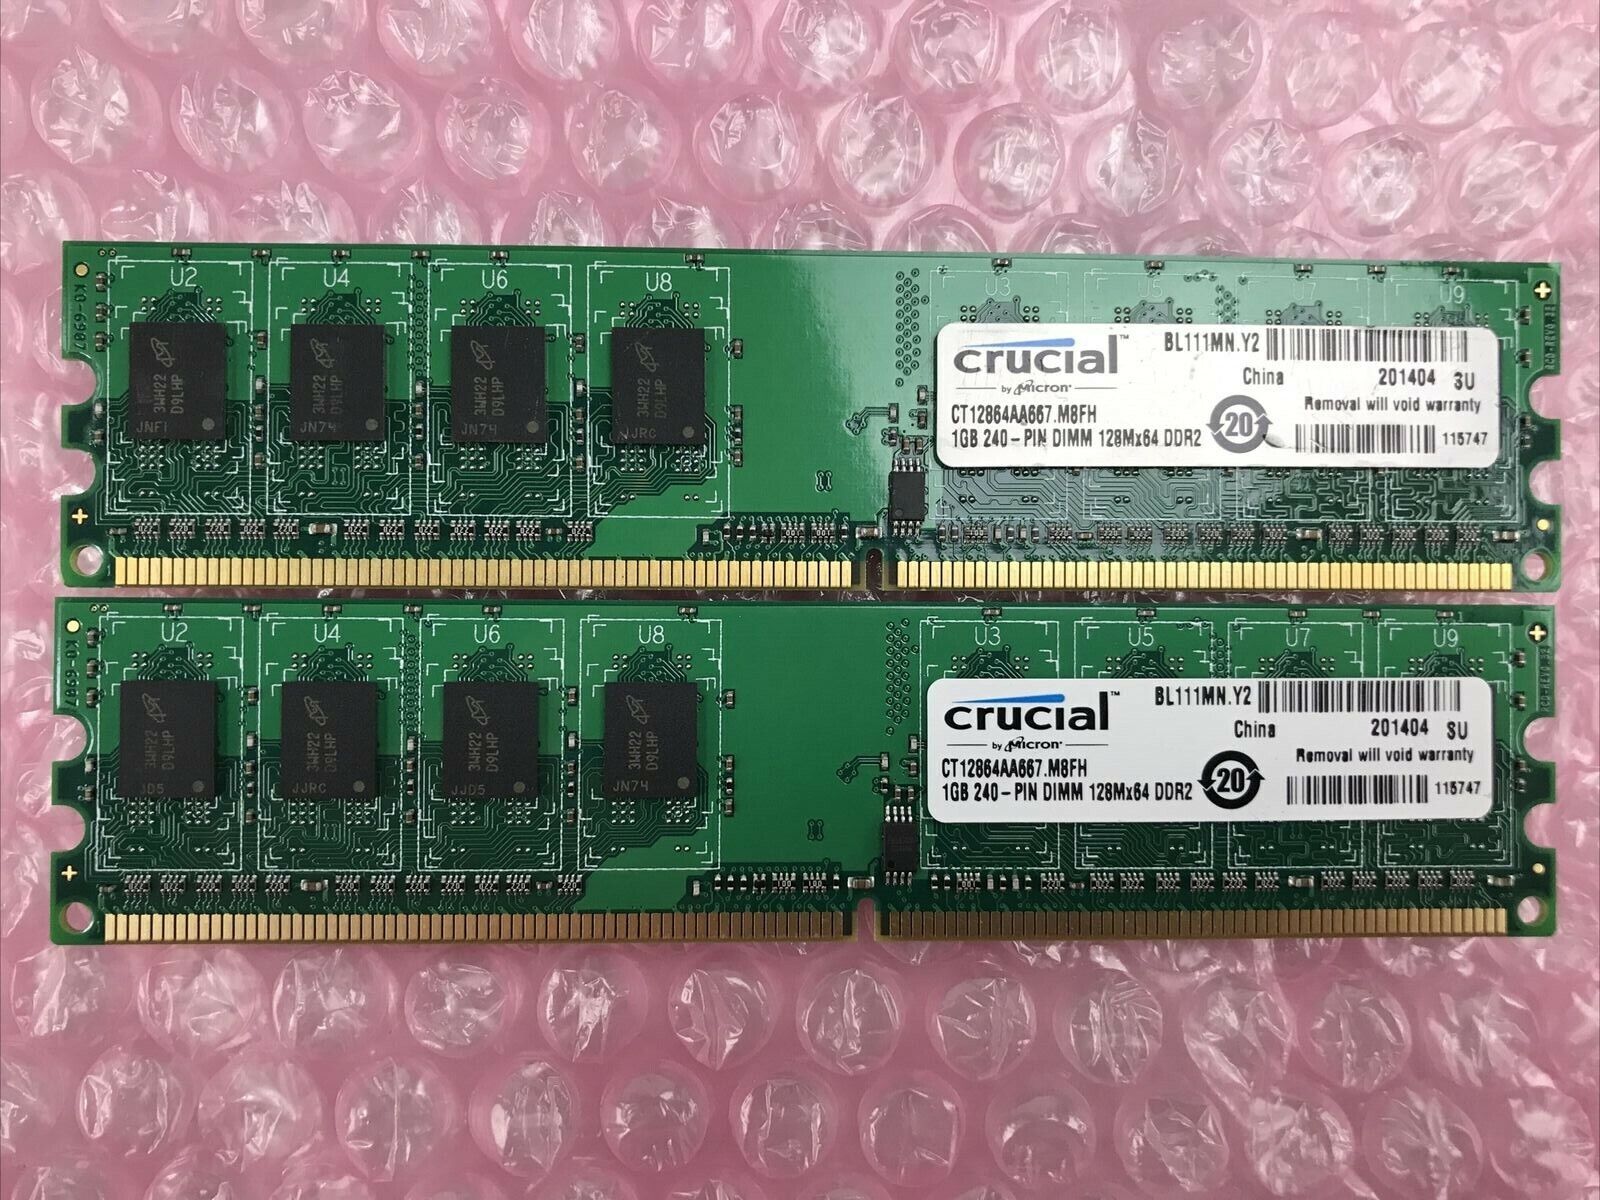 Lot of 2 Crucial 1GB 240 128Mx64 DDR2 DIMM CT12864AA667.M8FH